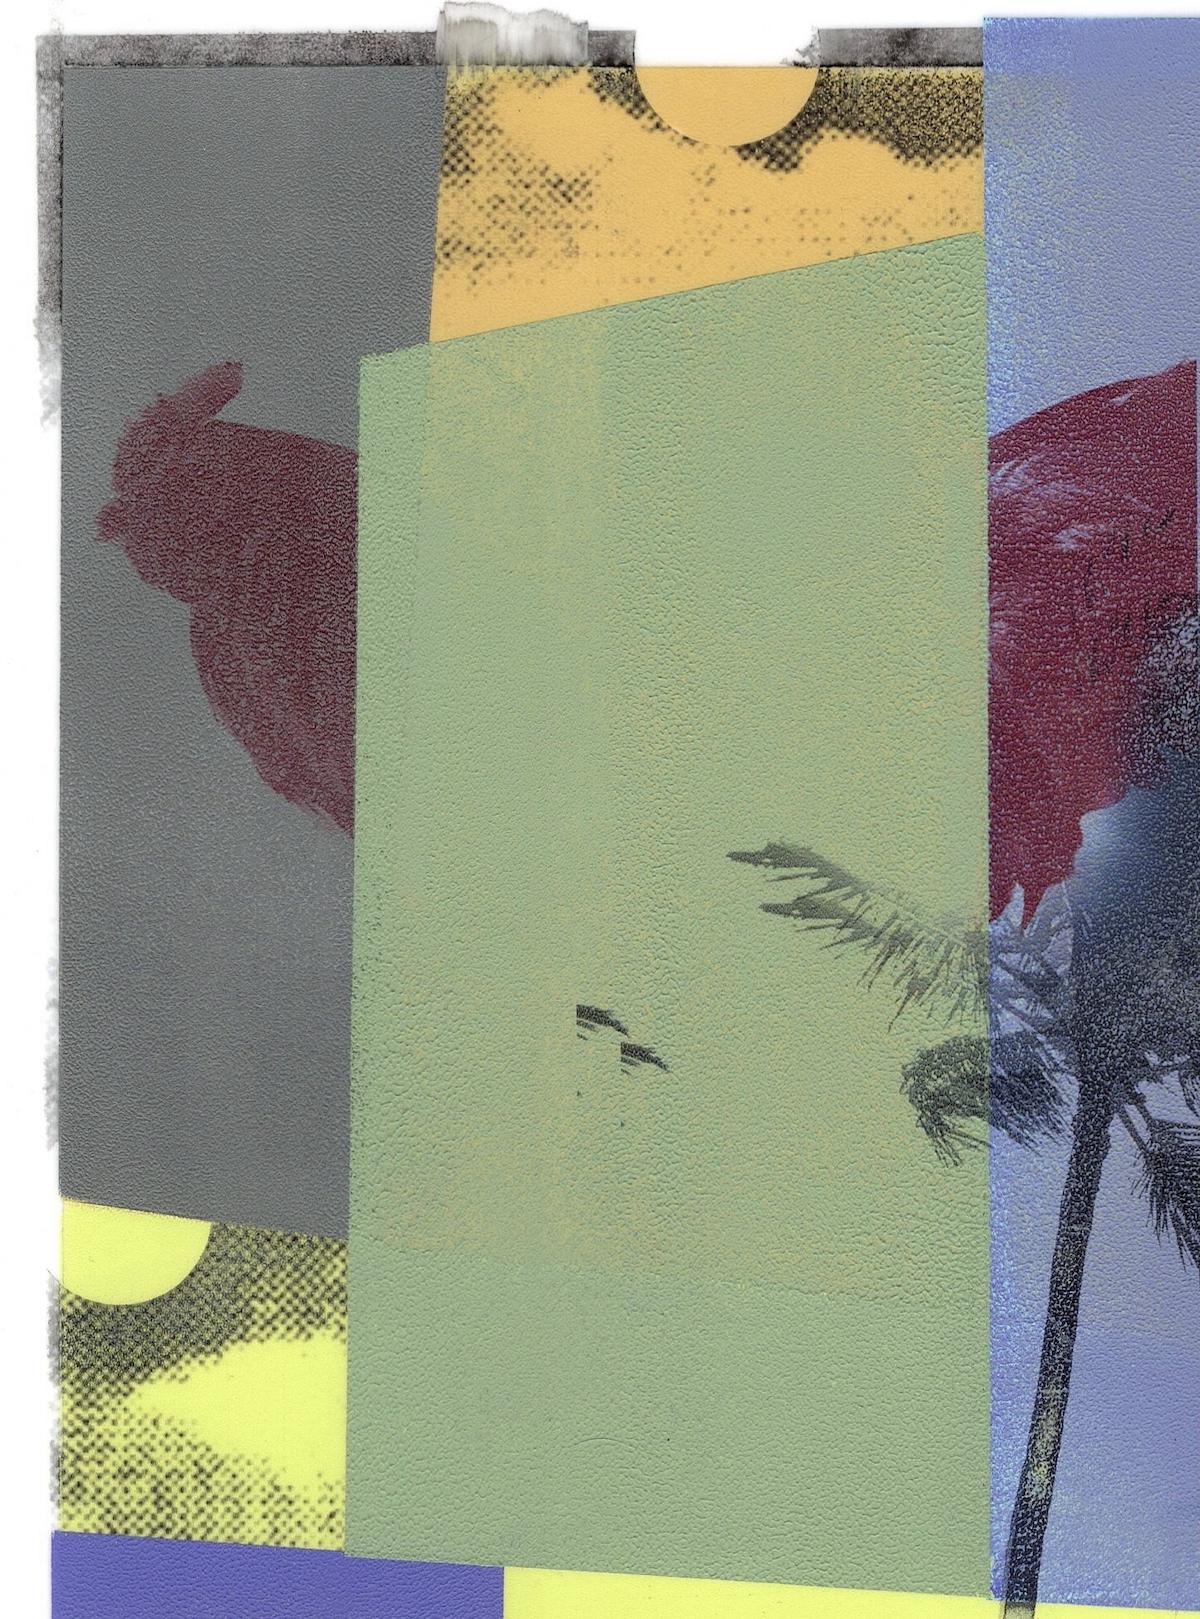 Cropped and deconstructed images of a Kauai beachfront, palm trees and a pair of roosters are represented on 14 x 11 inch Yupo translucent paper in Patty deGrandpre’s contemporary abstract mixed media print titled “Two Roosters Running Amok on Poipu